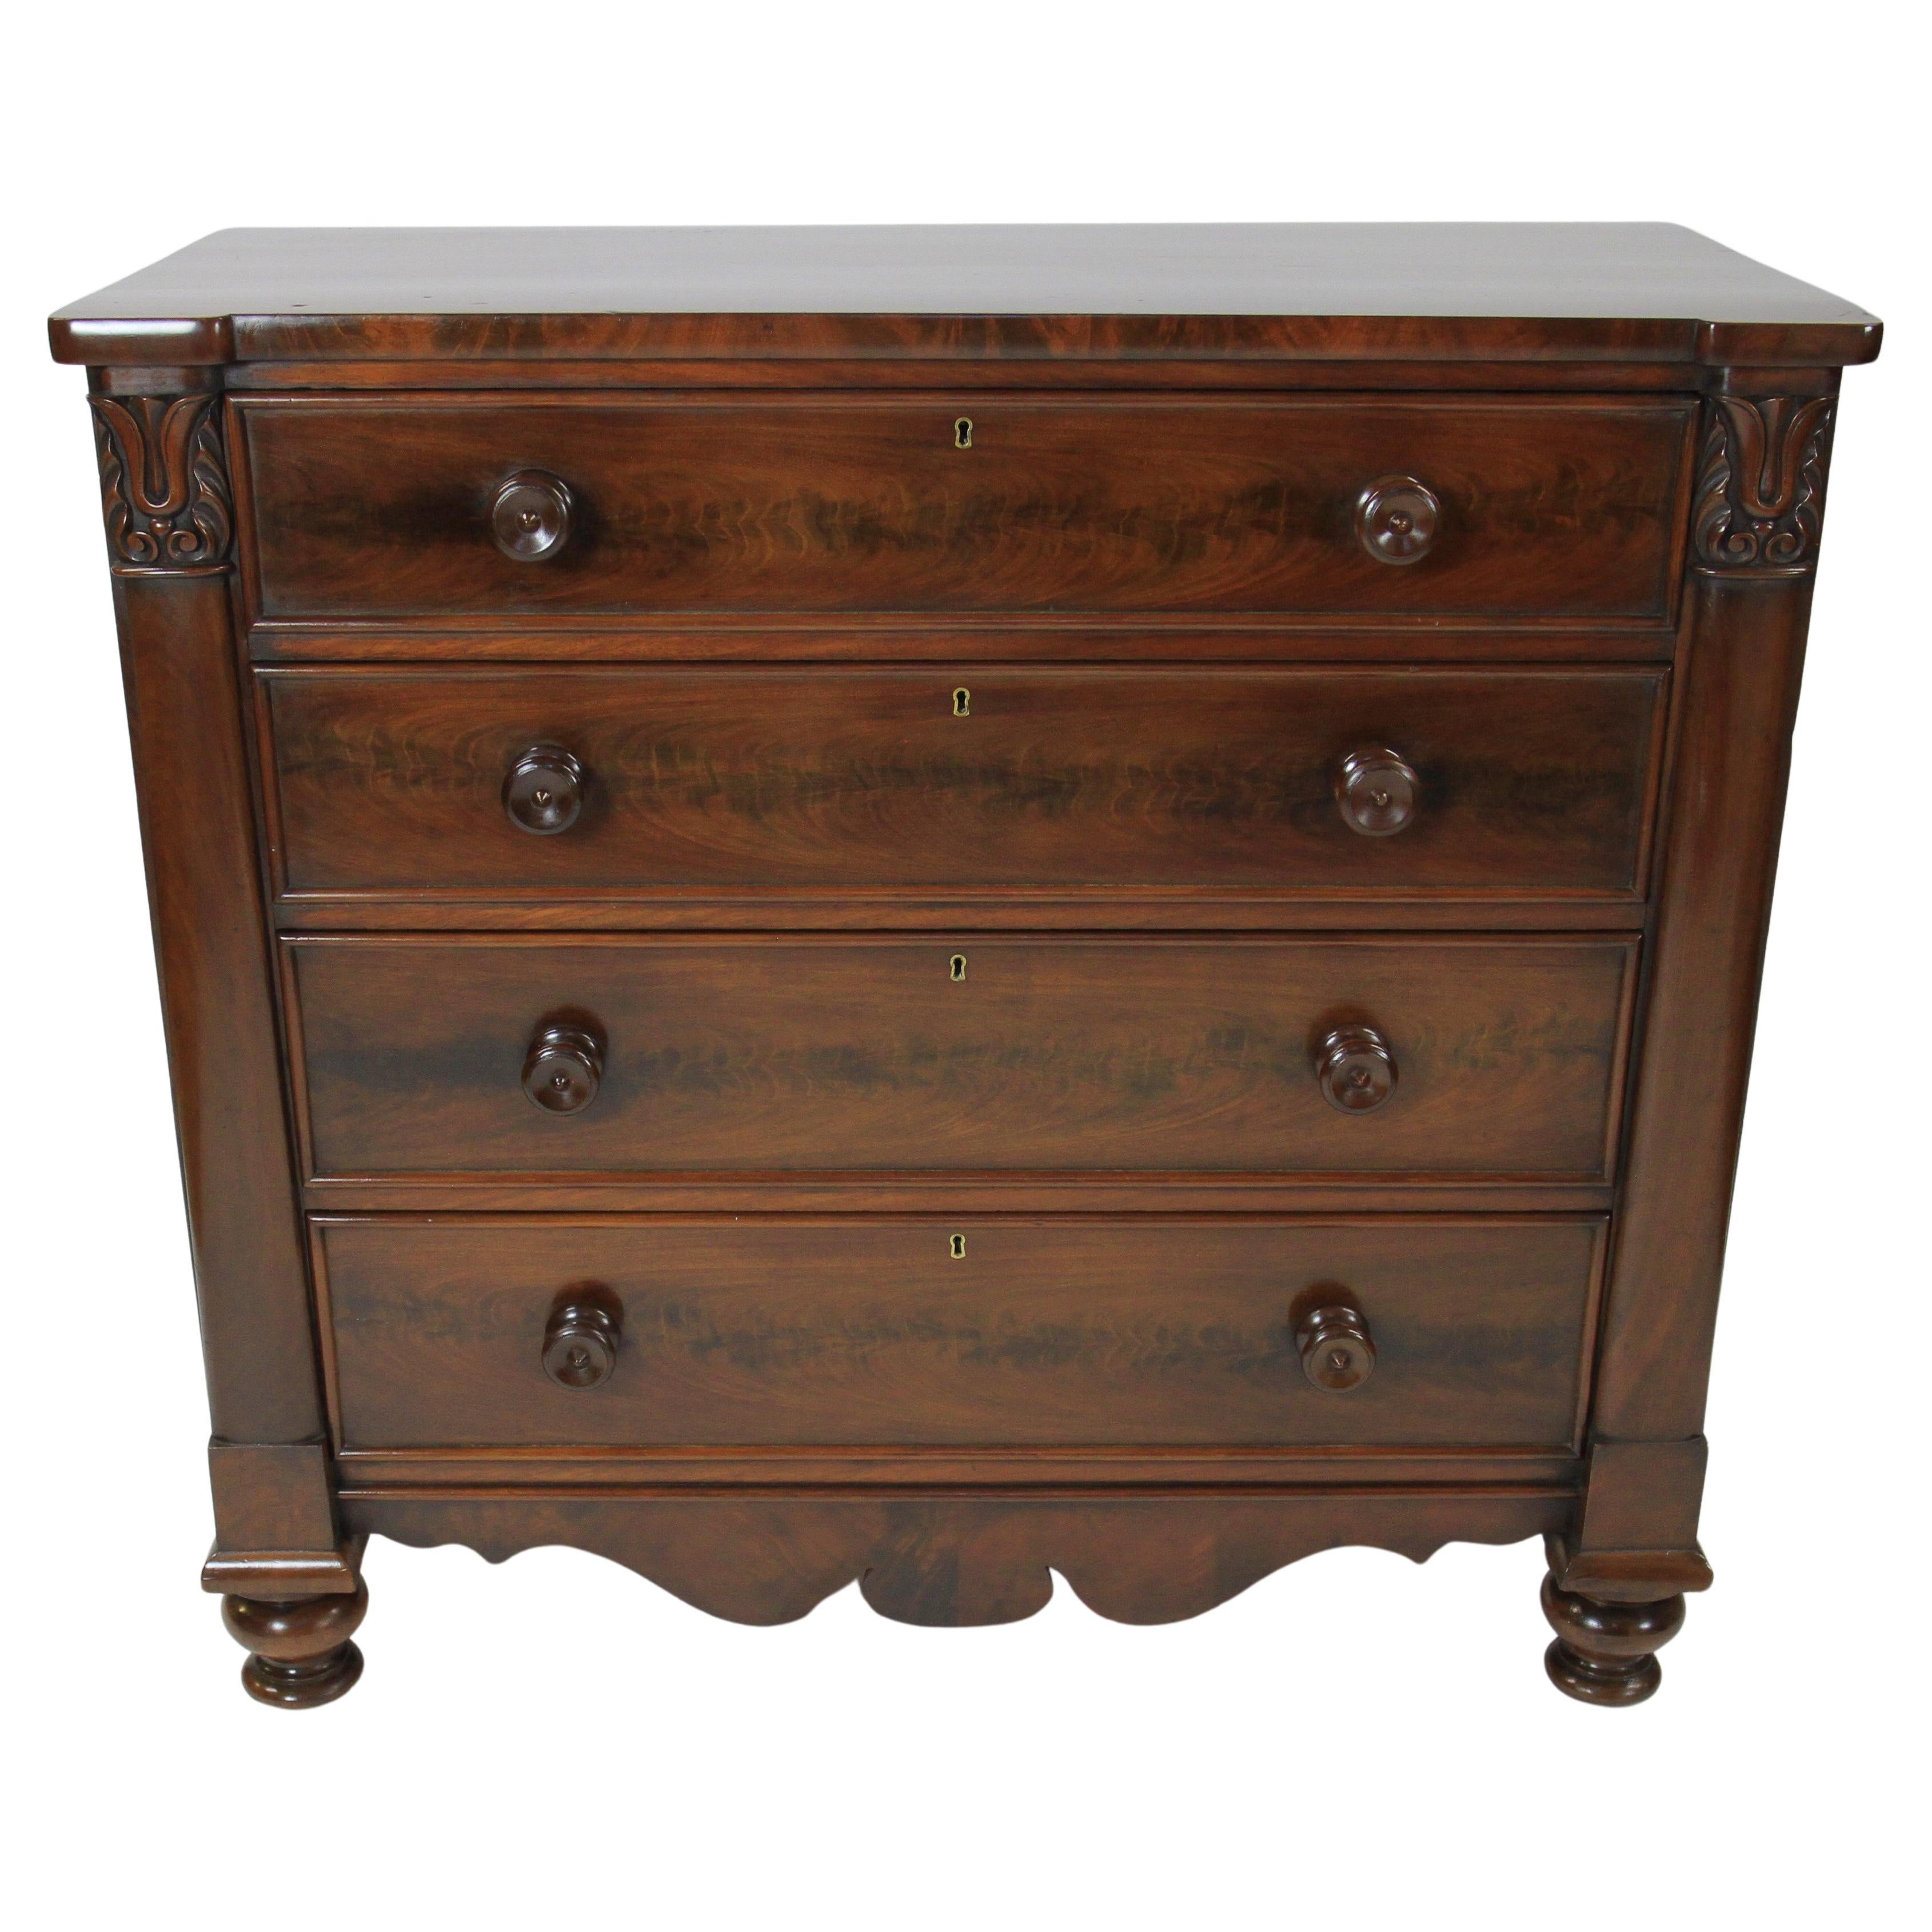 WILLIAM 1V Period  Mahogany 4 drawer chest  For Sale